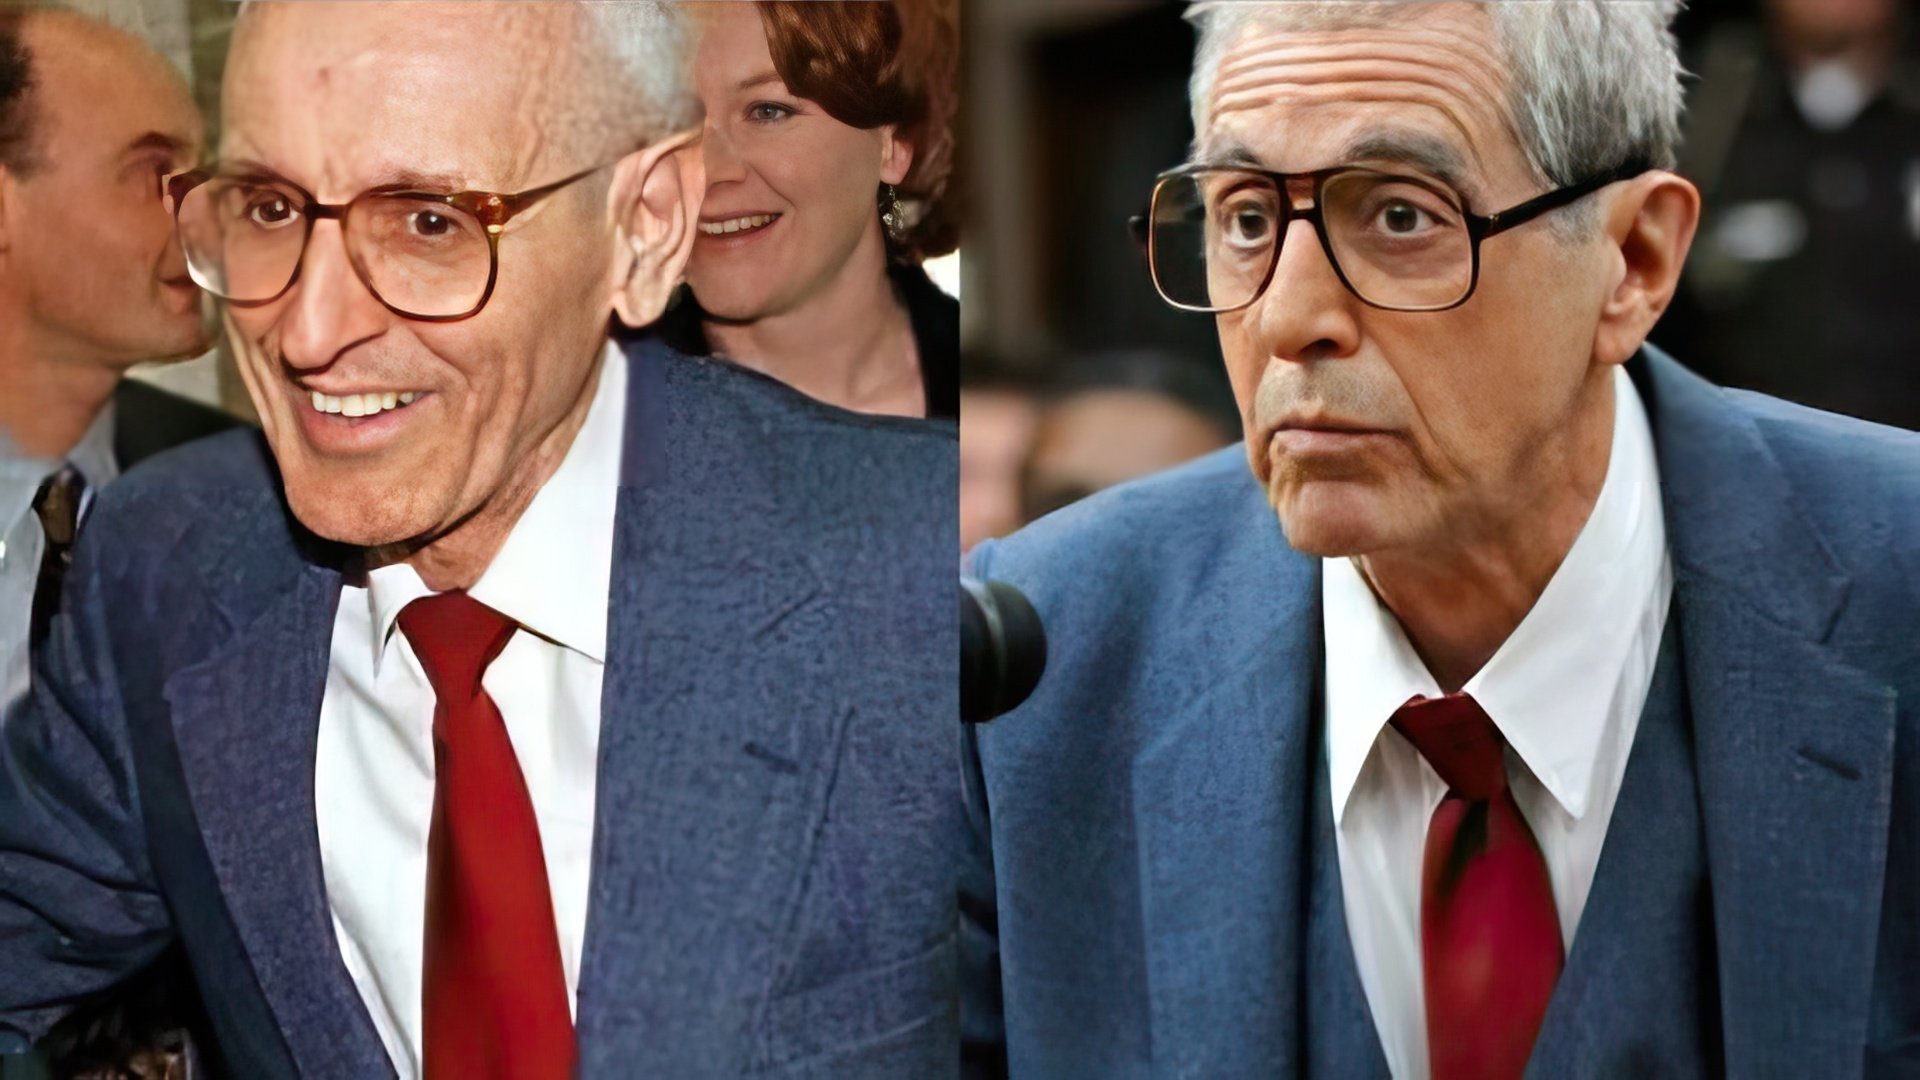 Real Jack Kevorkian and Al Pacino in his image